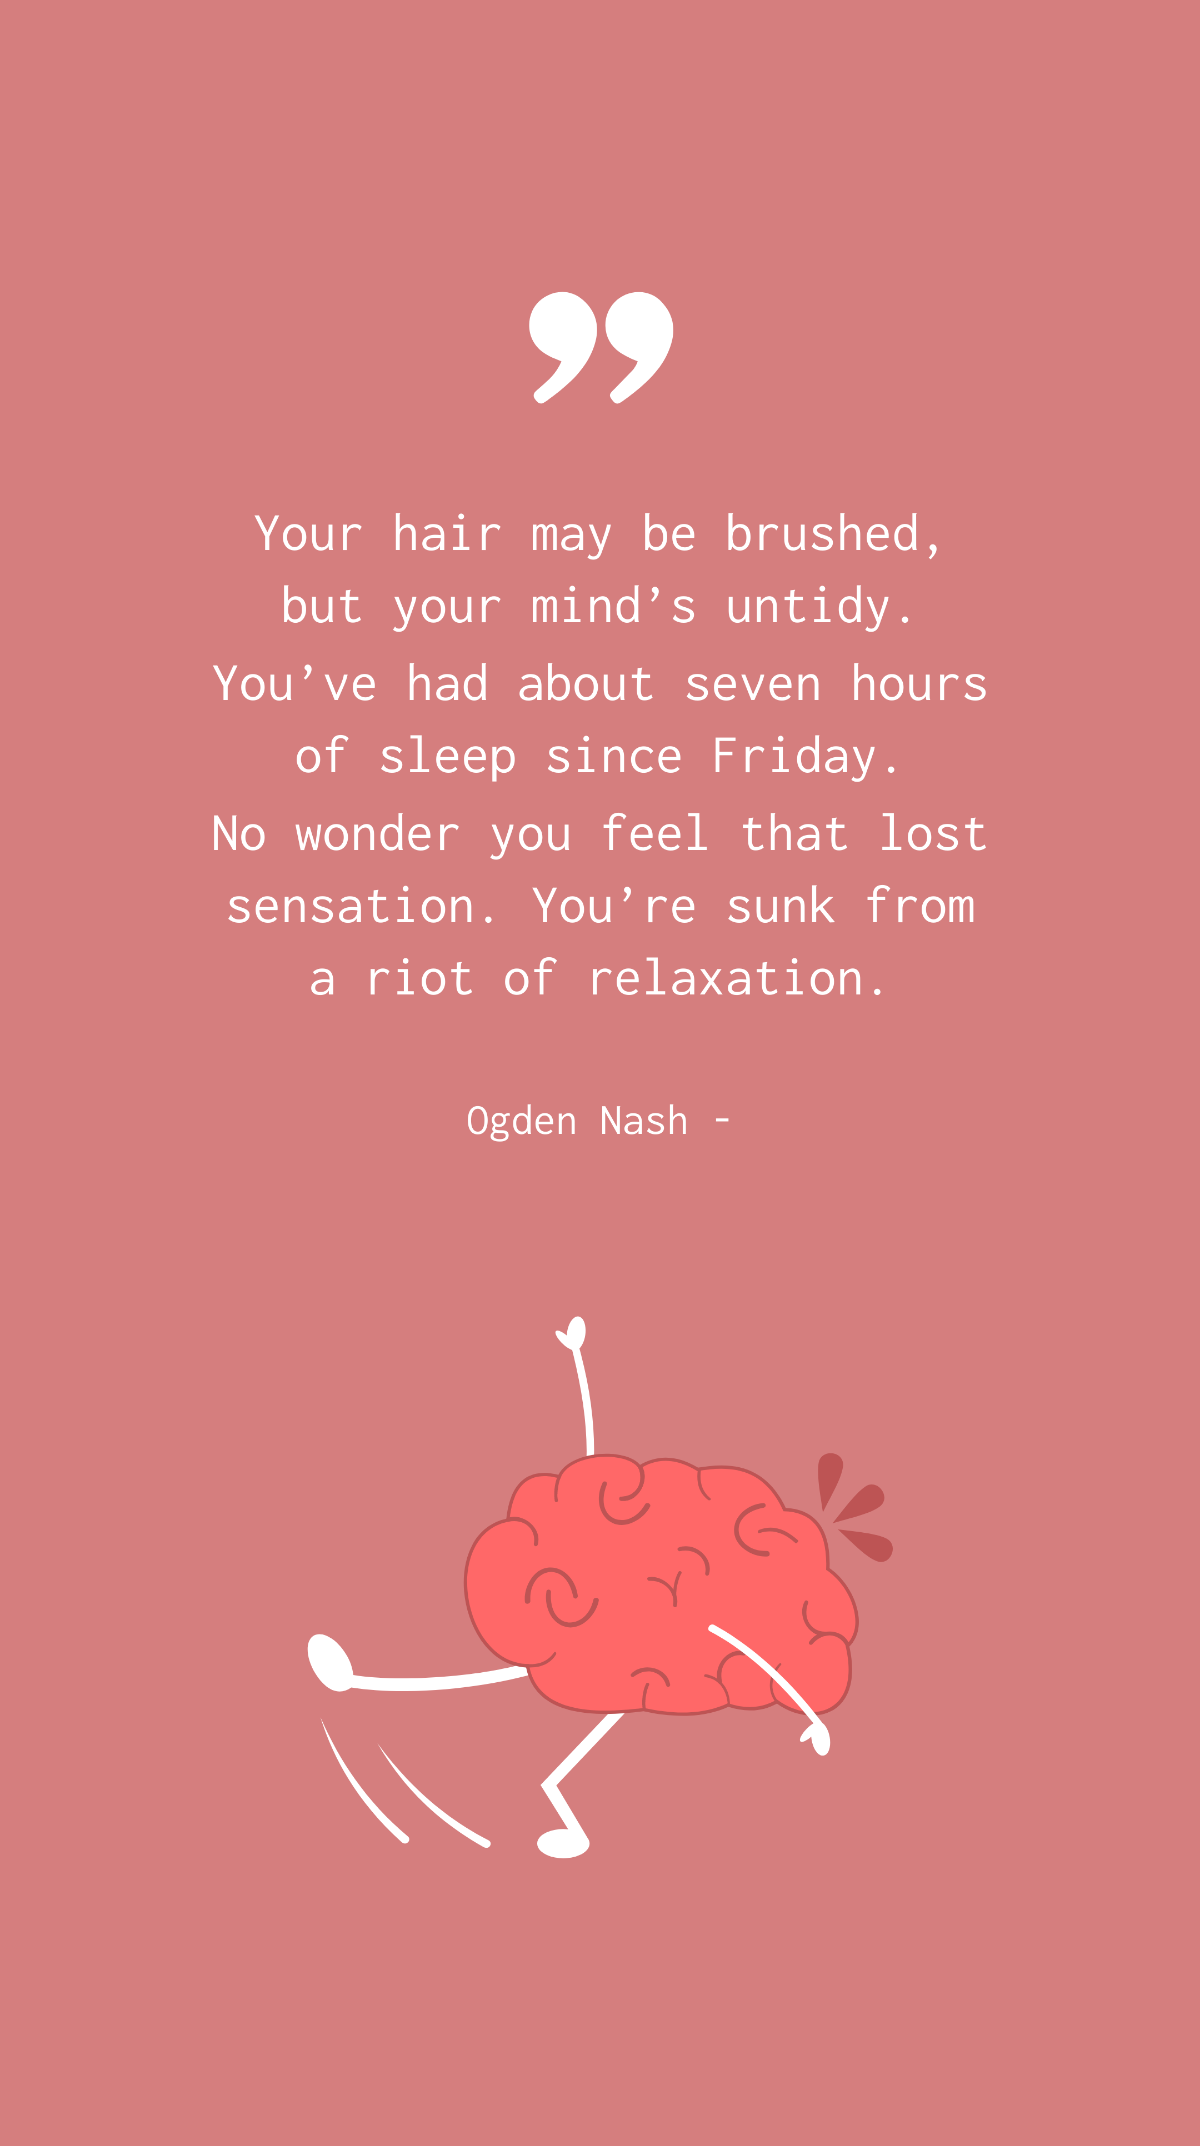 Ogden Nash - Your hair may be brushed, but your mind’s untidy. You’ve had about seven hours of sleep since Friday. No wonder you feel that lost sensation. You’re sunk from a riot of relaxation. Templa